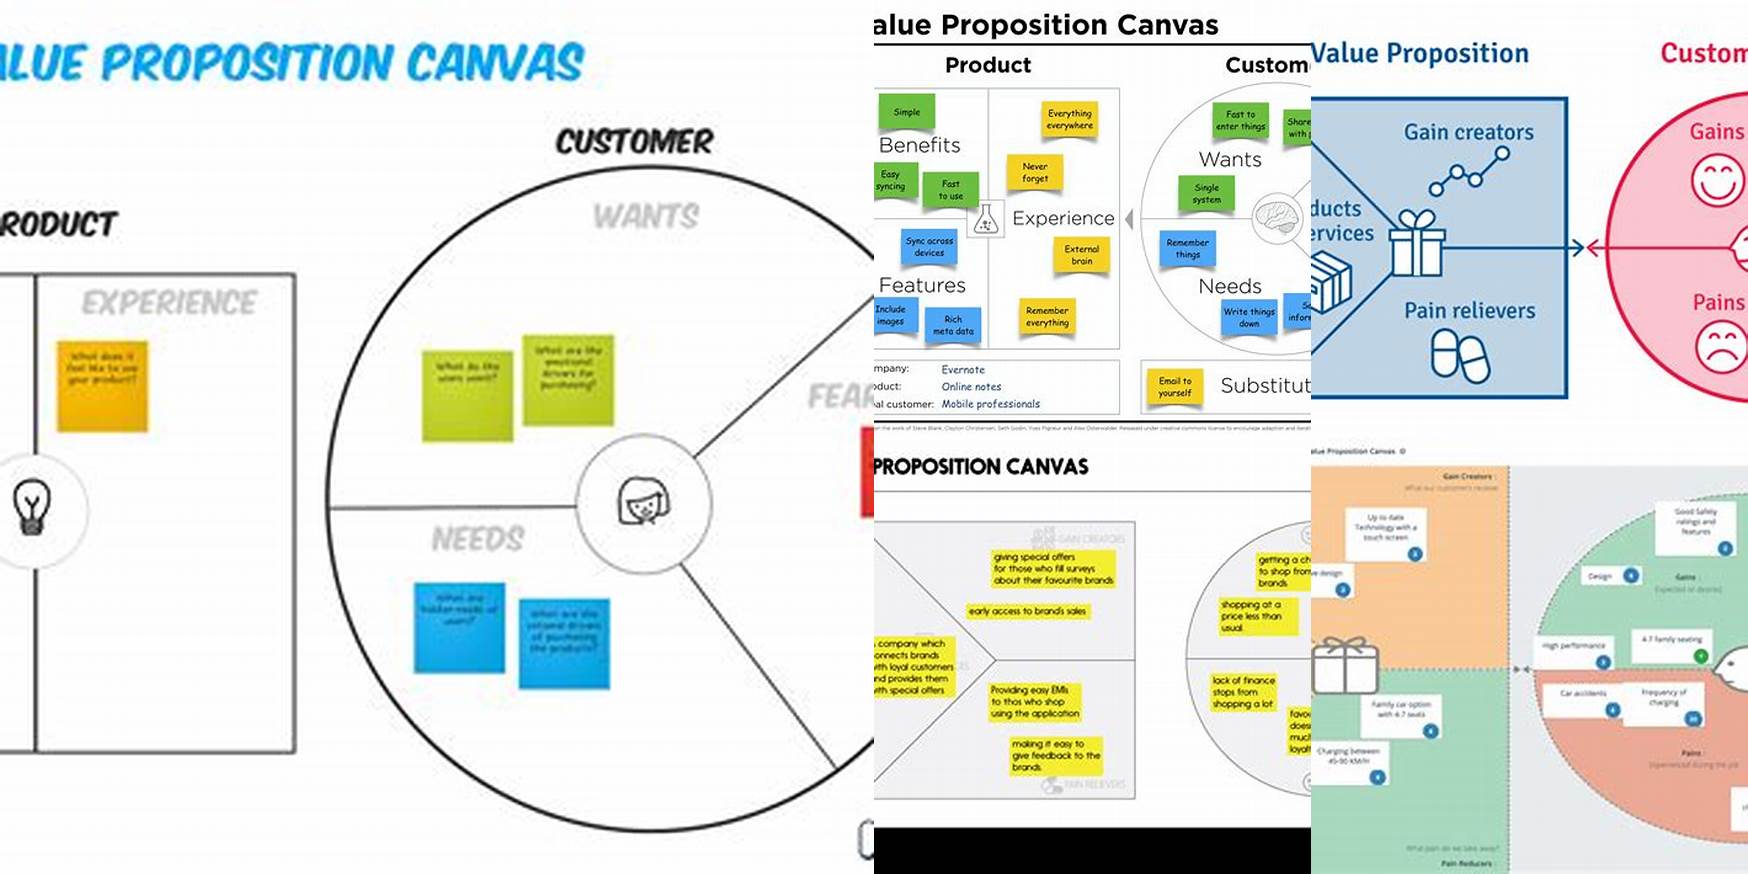 How To Create An Value Proposition Canvas